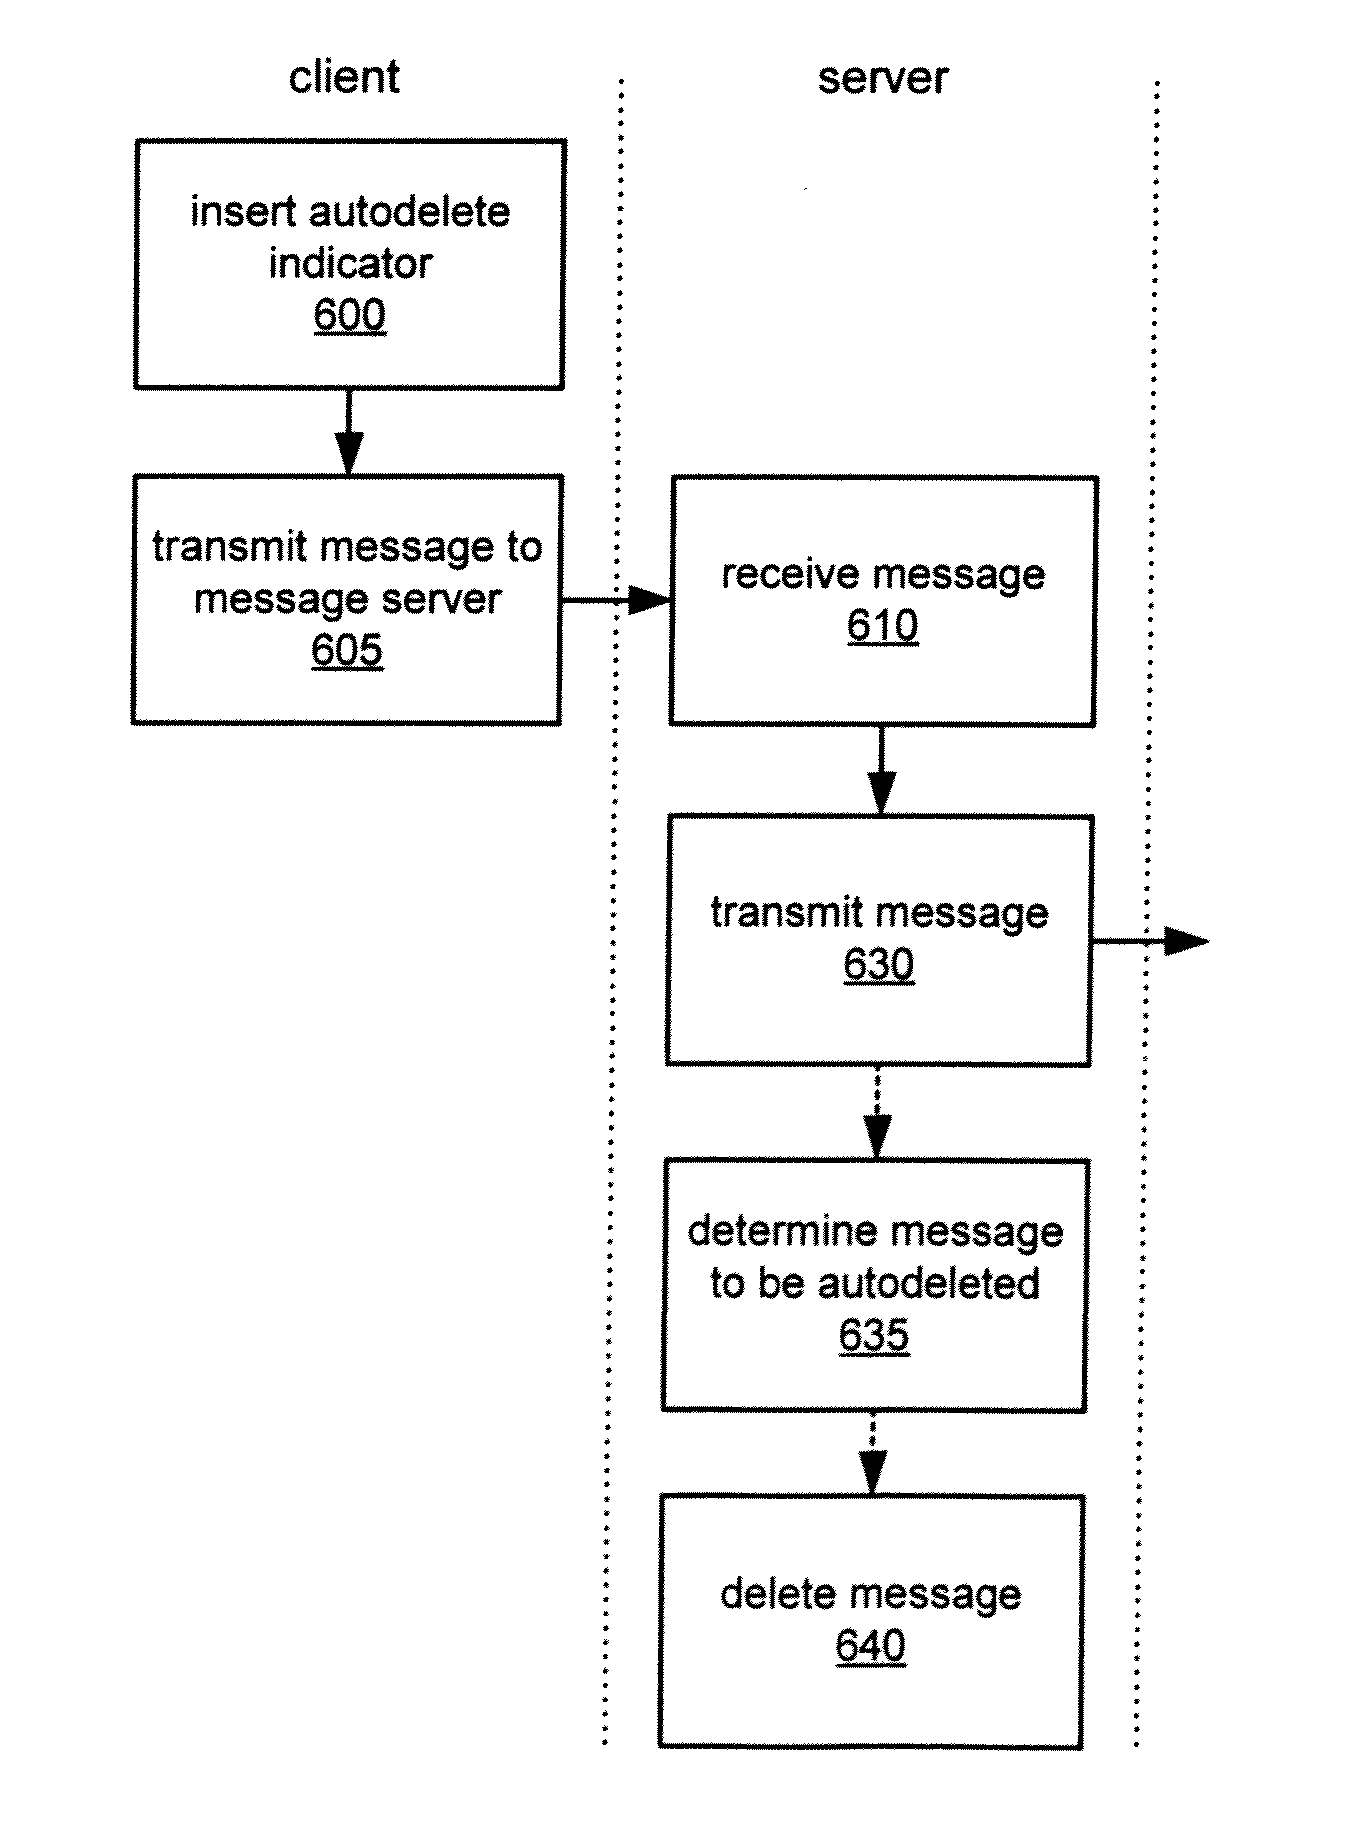 Automatic deletion of electronic messages